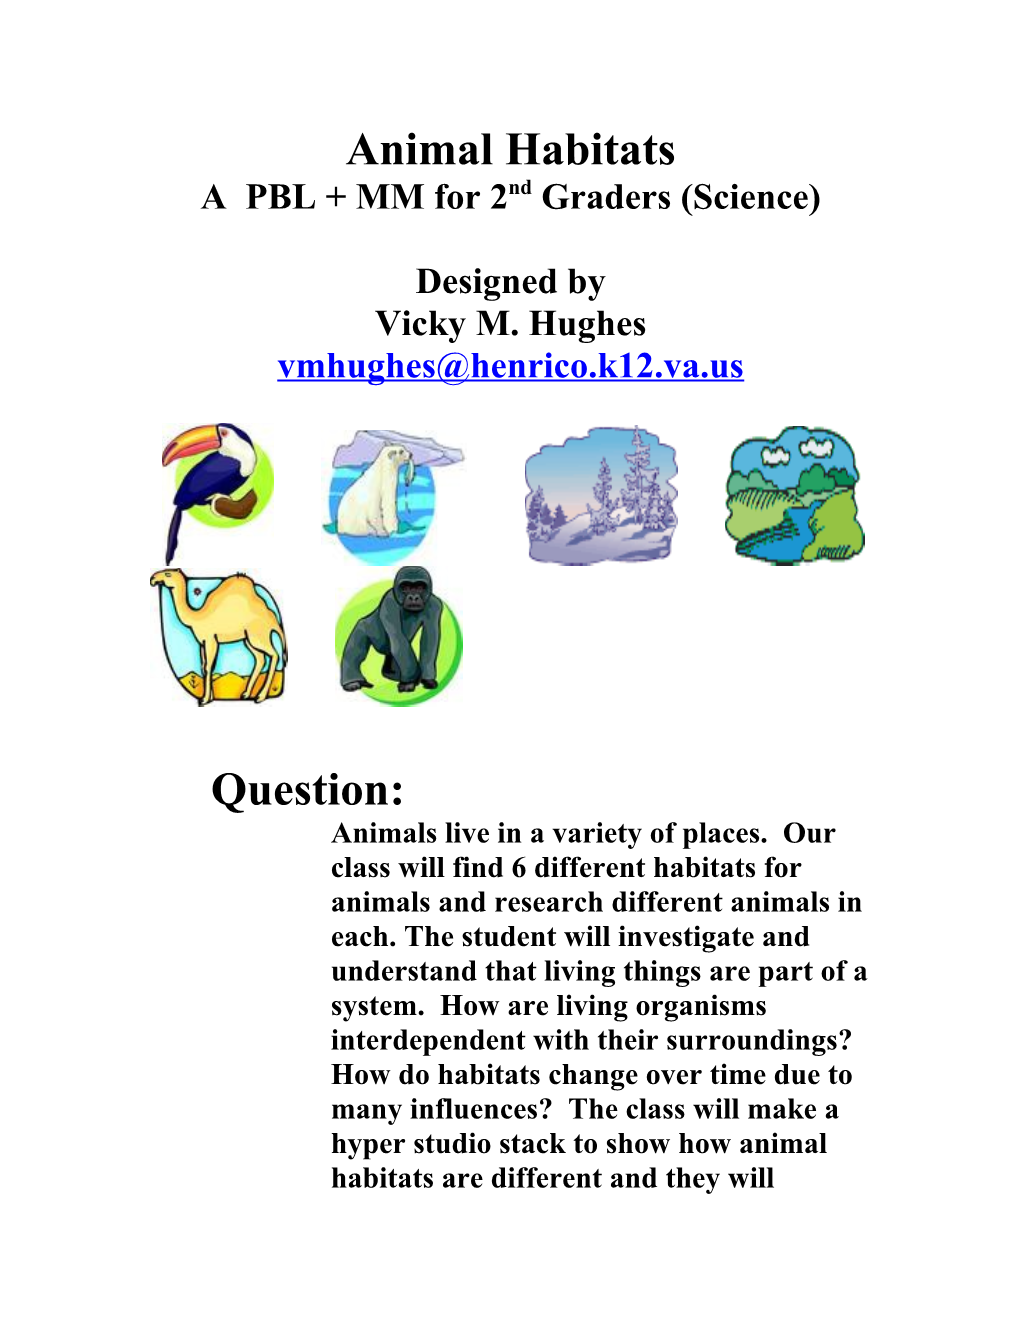 A PBL + MM for 2Nd Graders (Science)